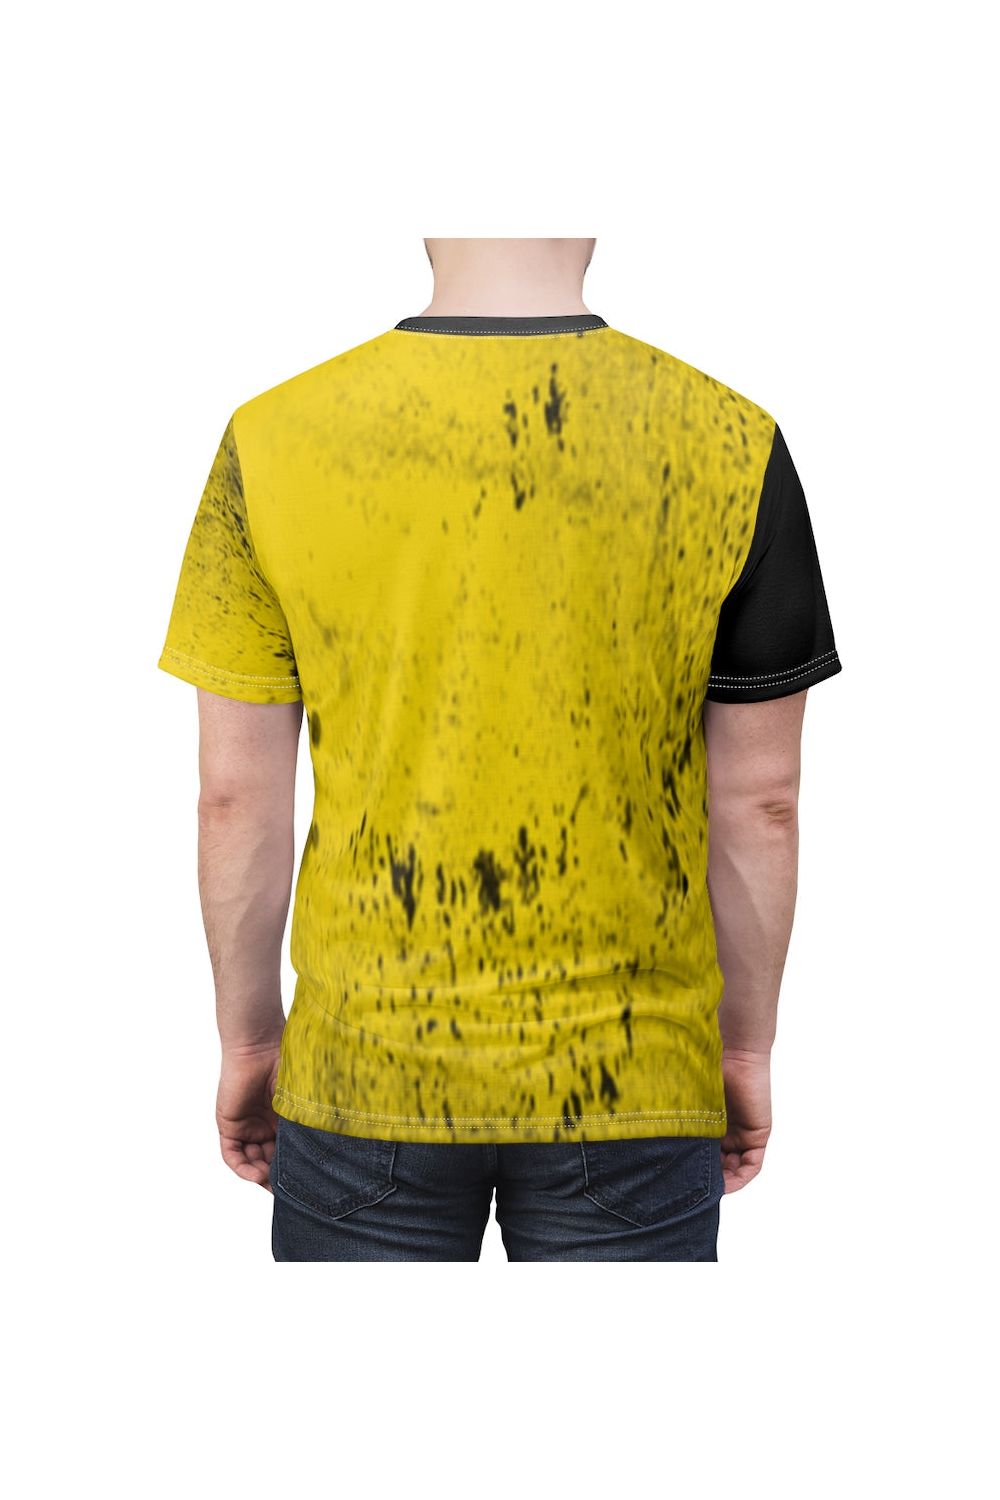 Men Black and Yellow Smile Short Sleeve T-Shirt, Gift For Father's Day - NicholesGifts